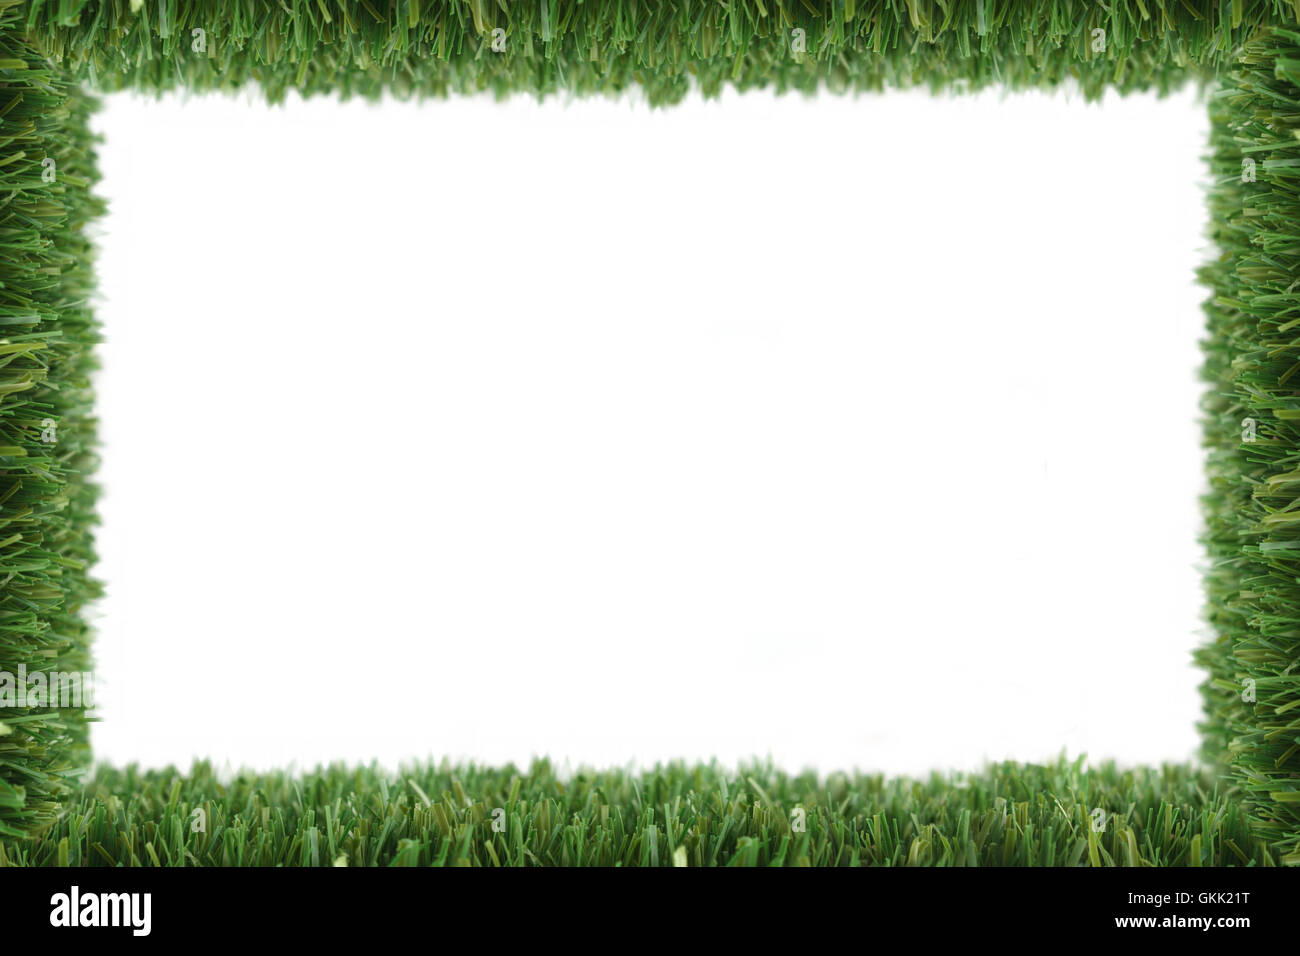 Grass frame with white background Stock Photo